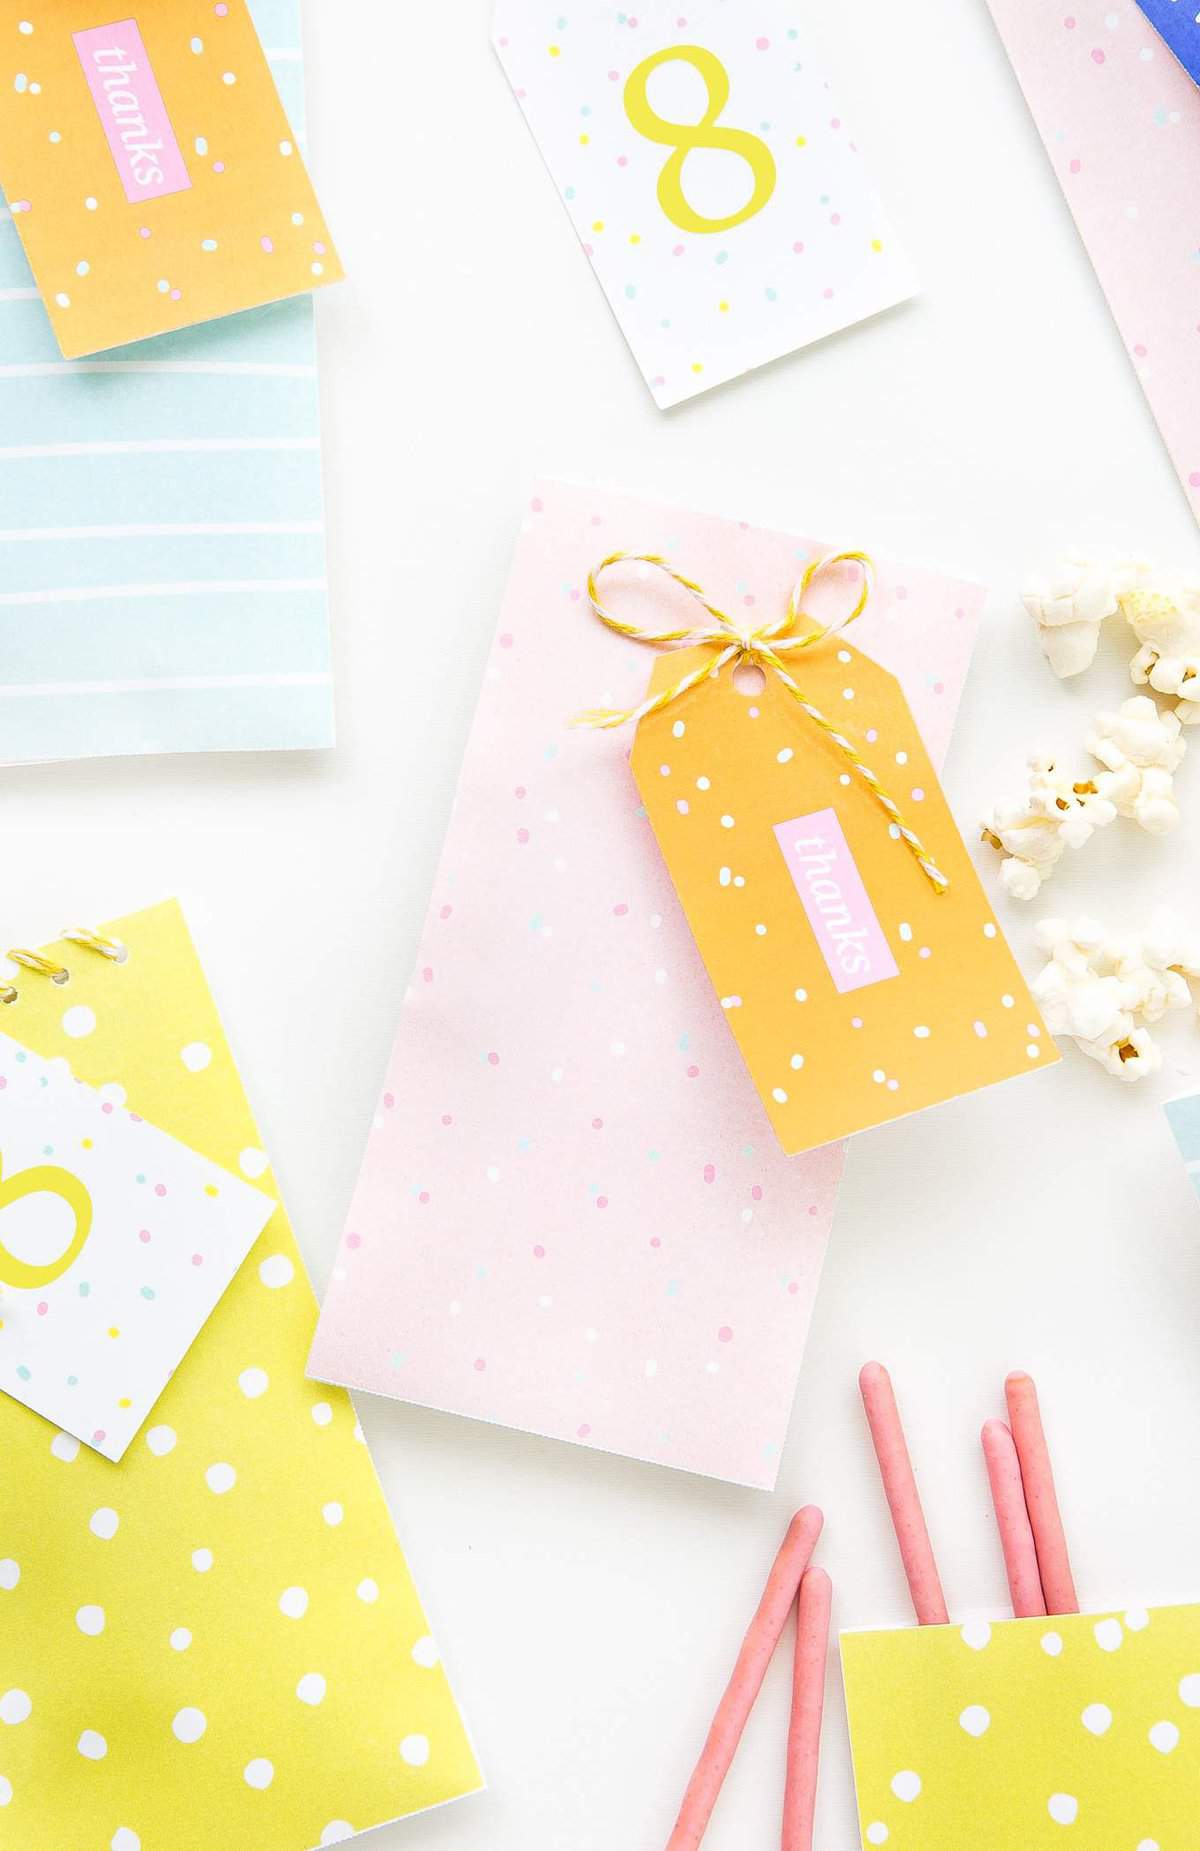 Download these fun & colorful printable birthday gift tags and attach them to treat bags for an easy party favor idea!